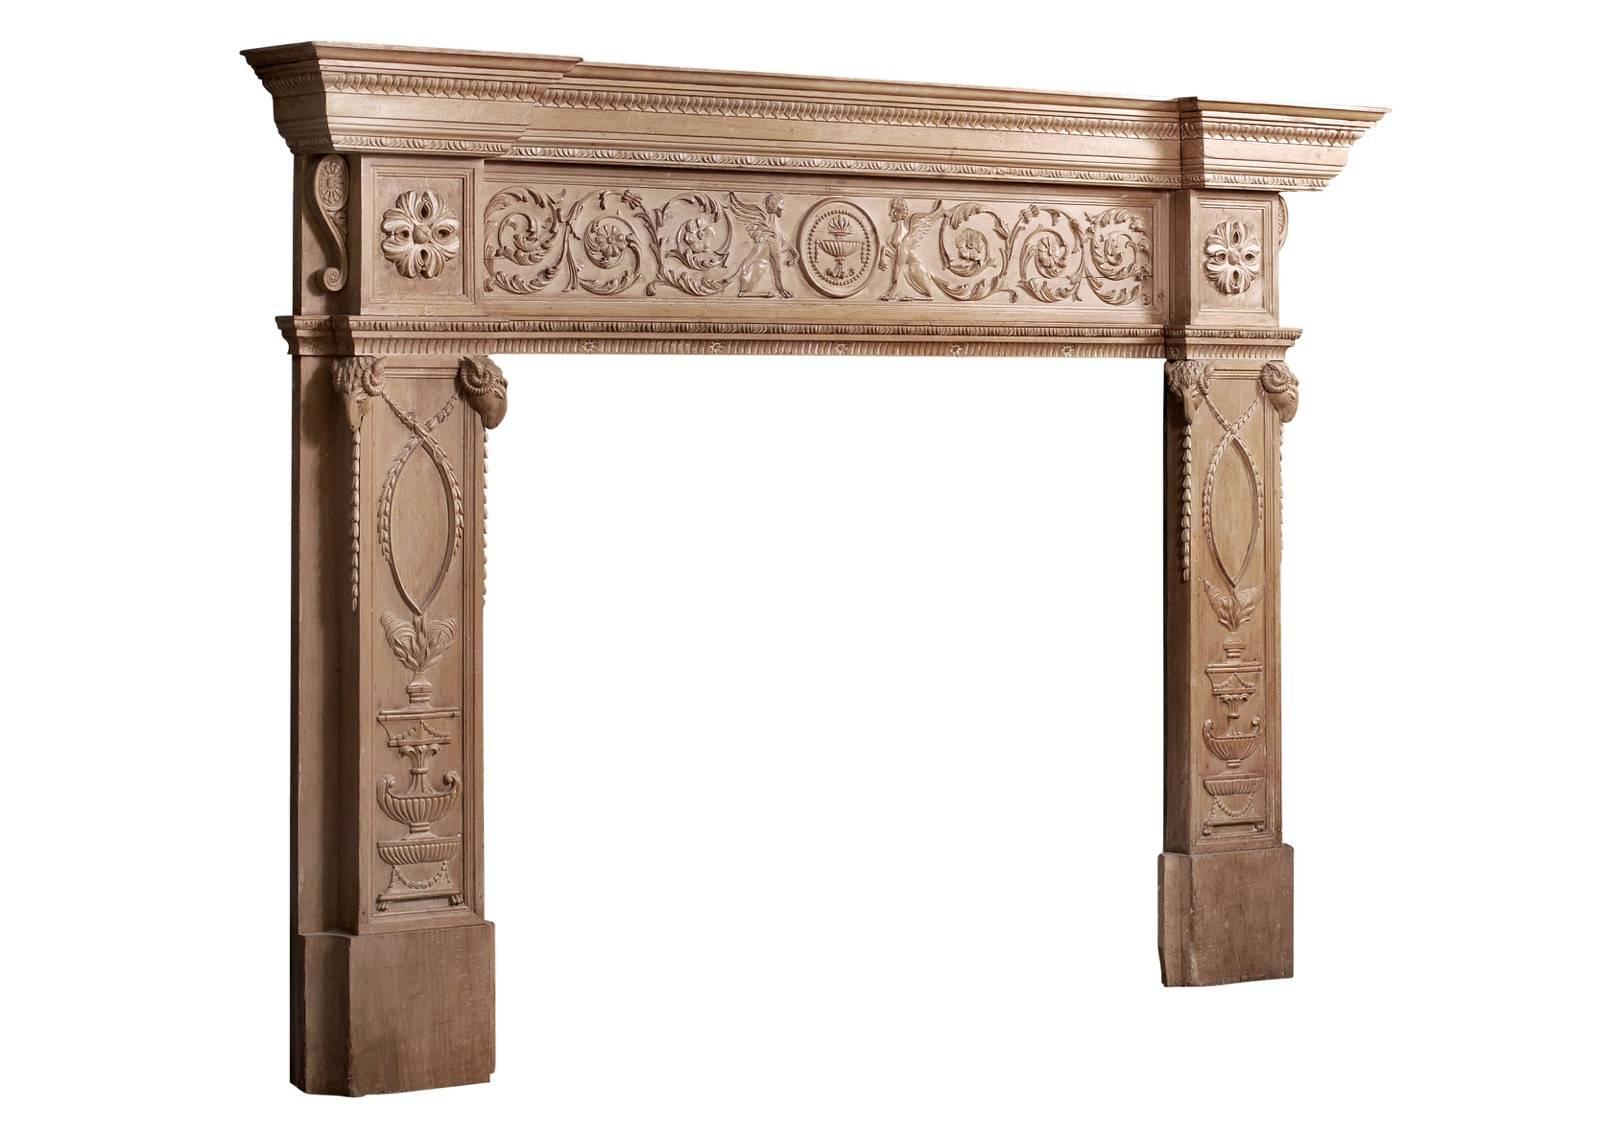 An imposing period English Regency pine fireplace. The finely carved jambs featuring urns and swags surmounted by carved rams heads, the end blockings with carved round paterae, the frieze with delicately carved floral scrolls and winged